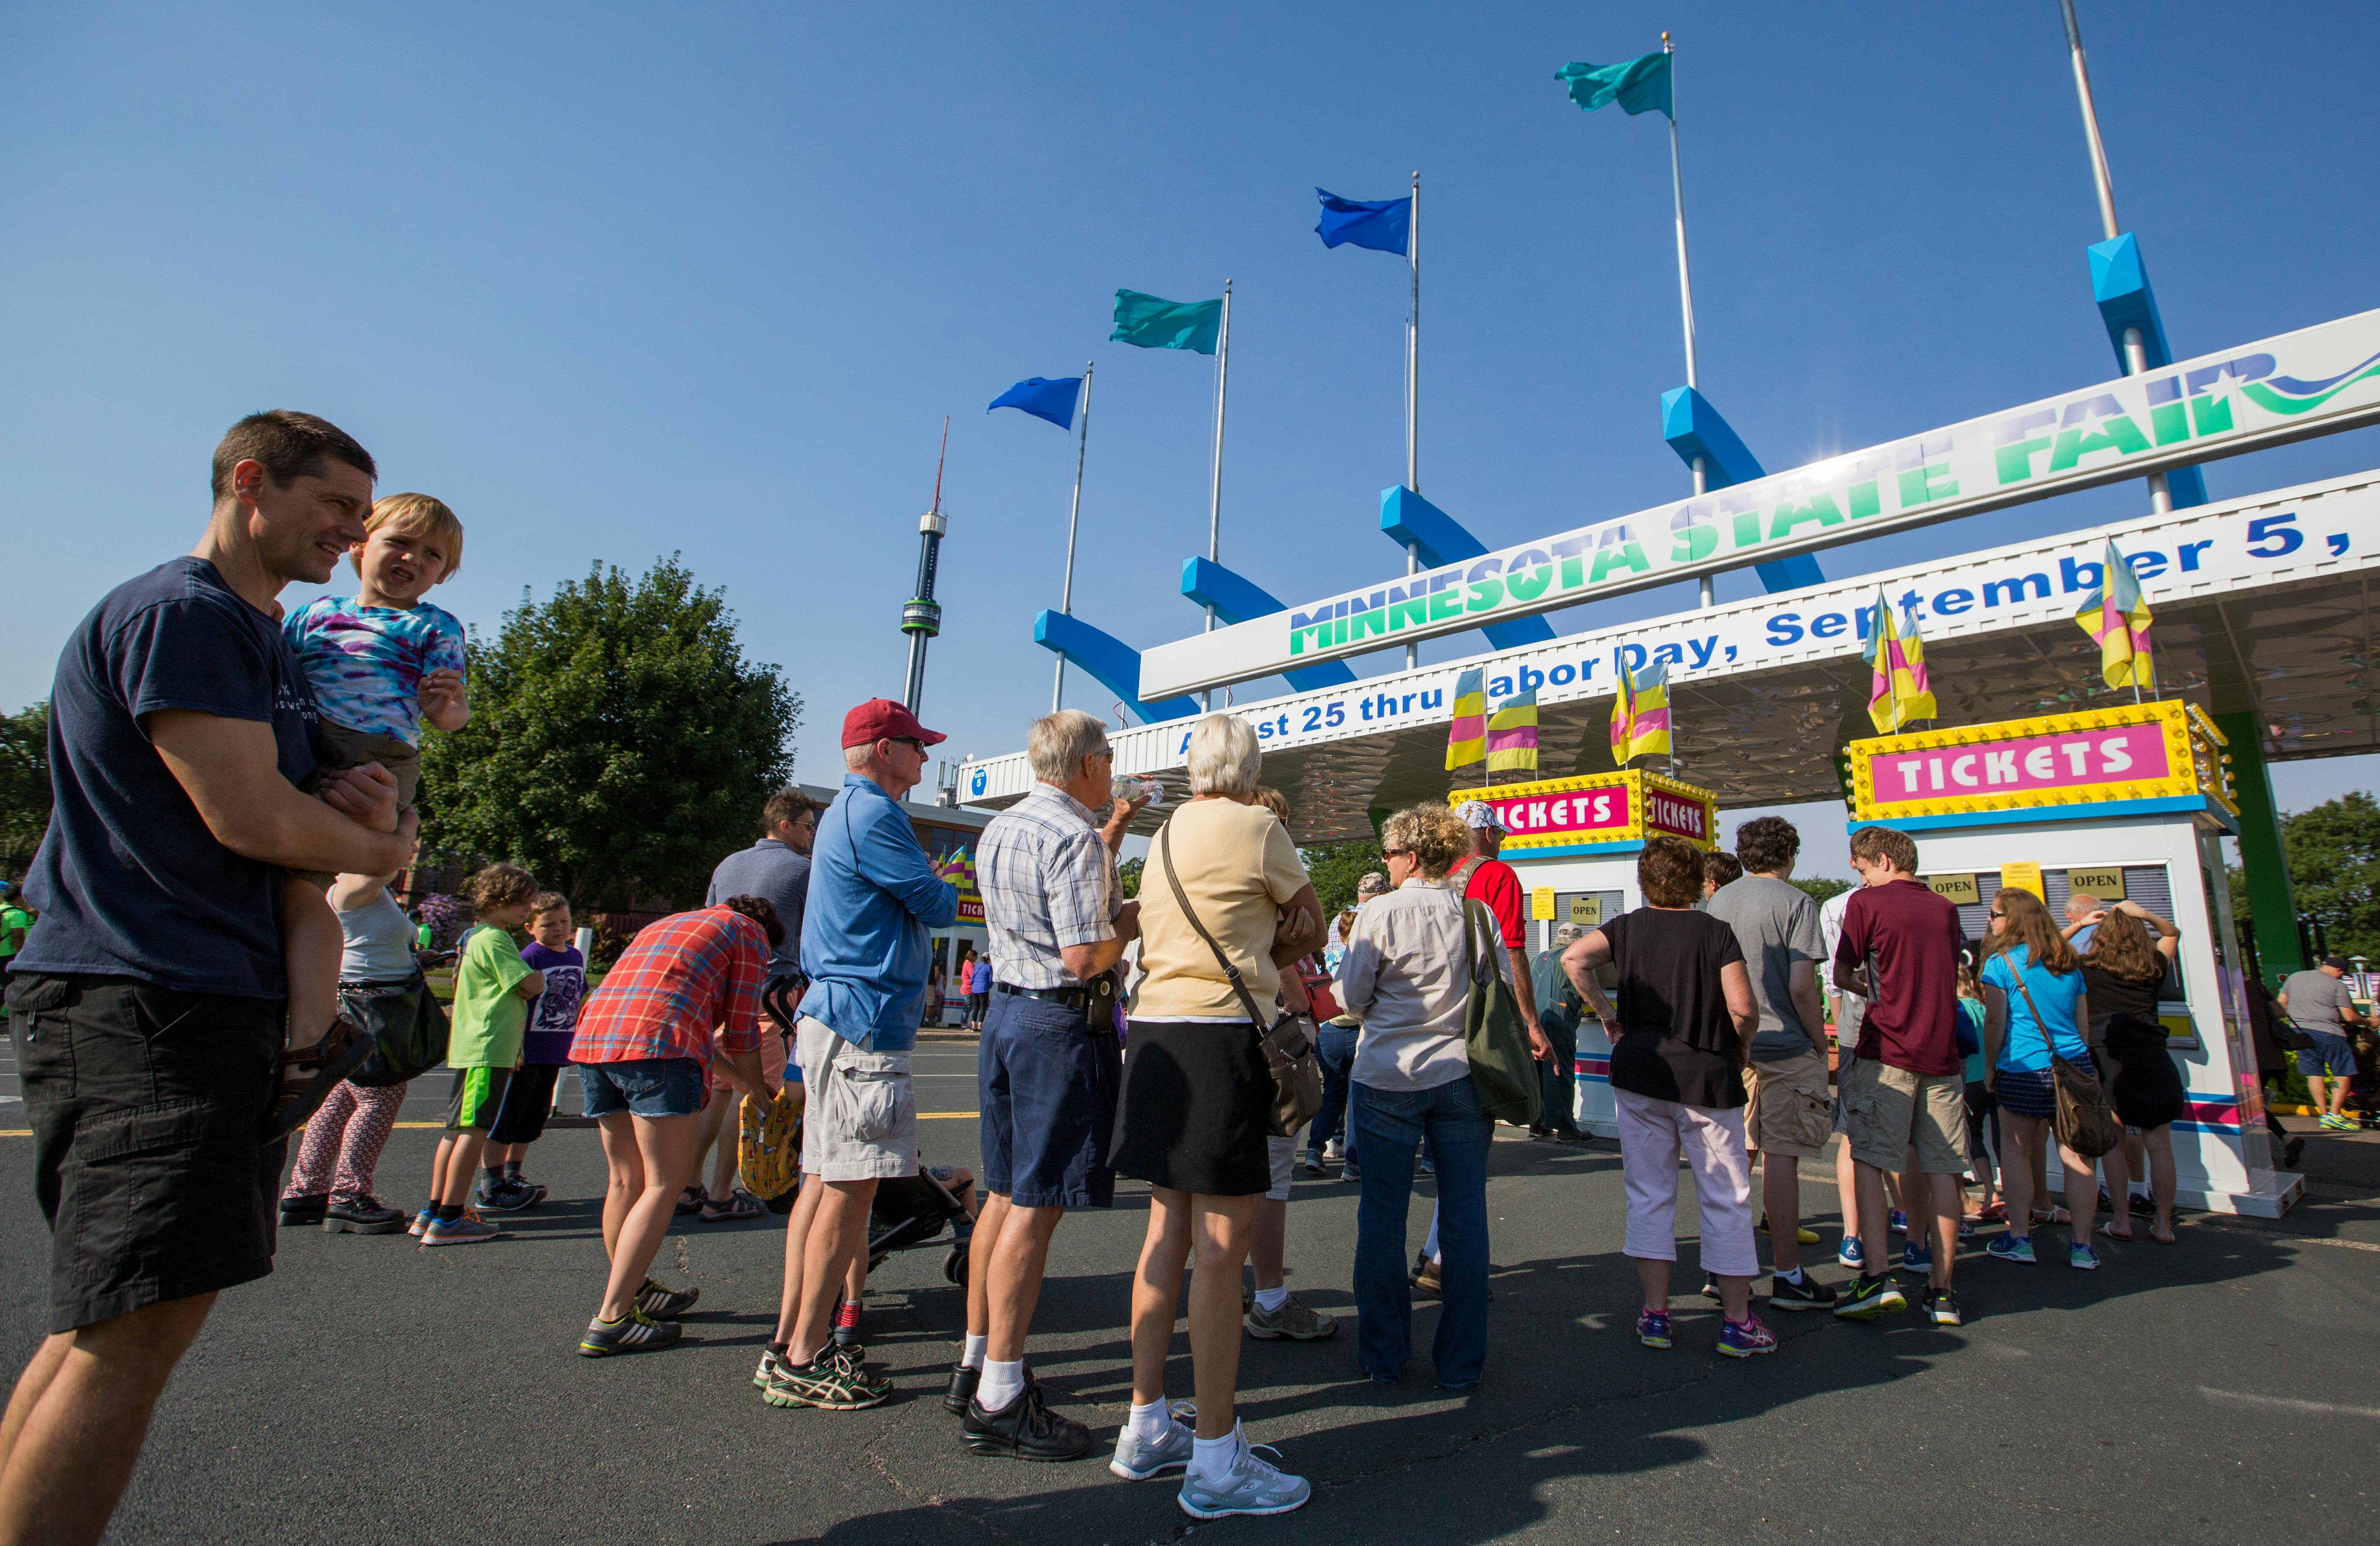 Mn State Fair Schedule 2022 2022 Minnesota State Fair Will Have Higher Admission Prices, Shorter Hours  | Star Tribune